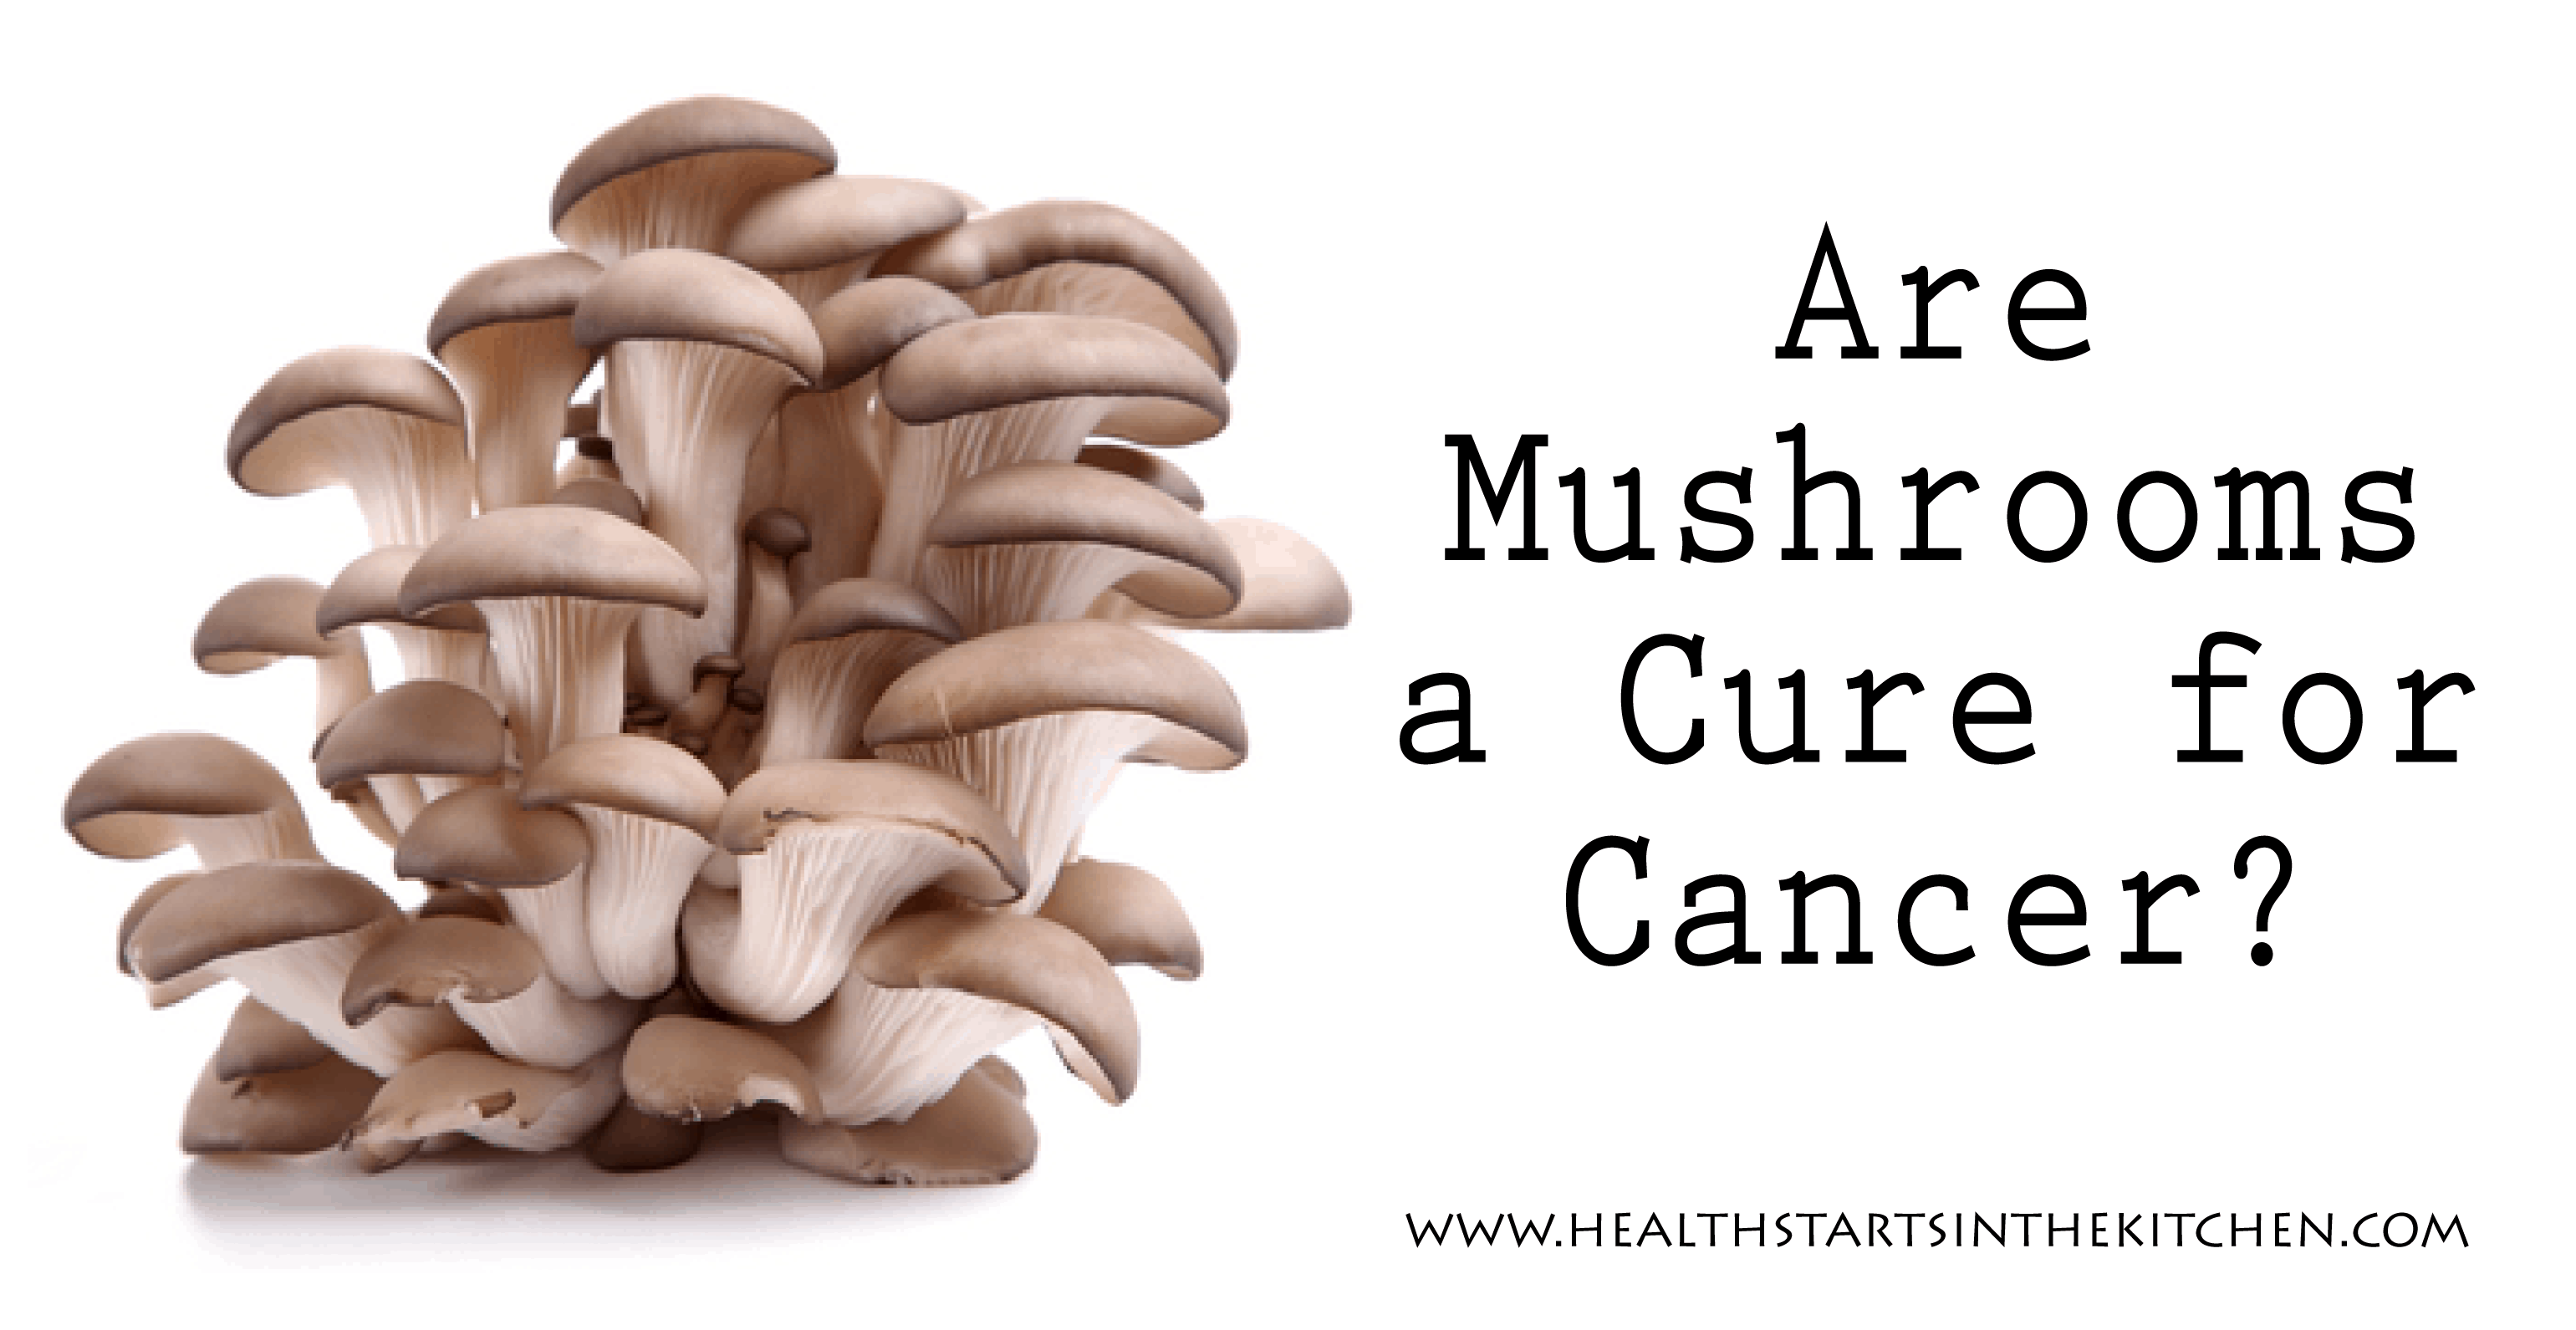 Could Mushrooms Aid in the Treatment of Cancer?